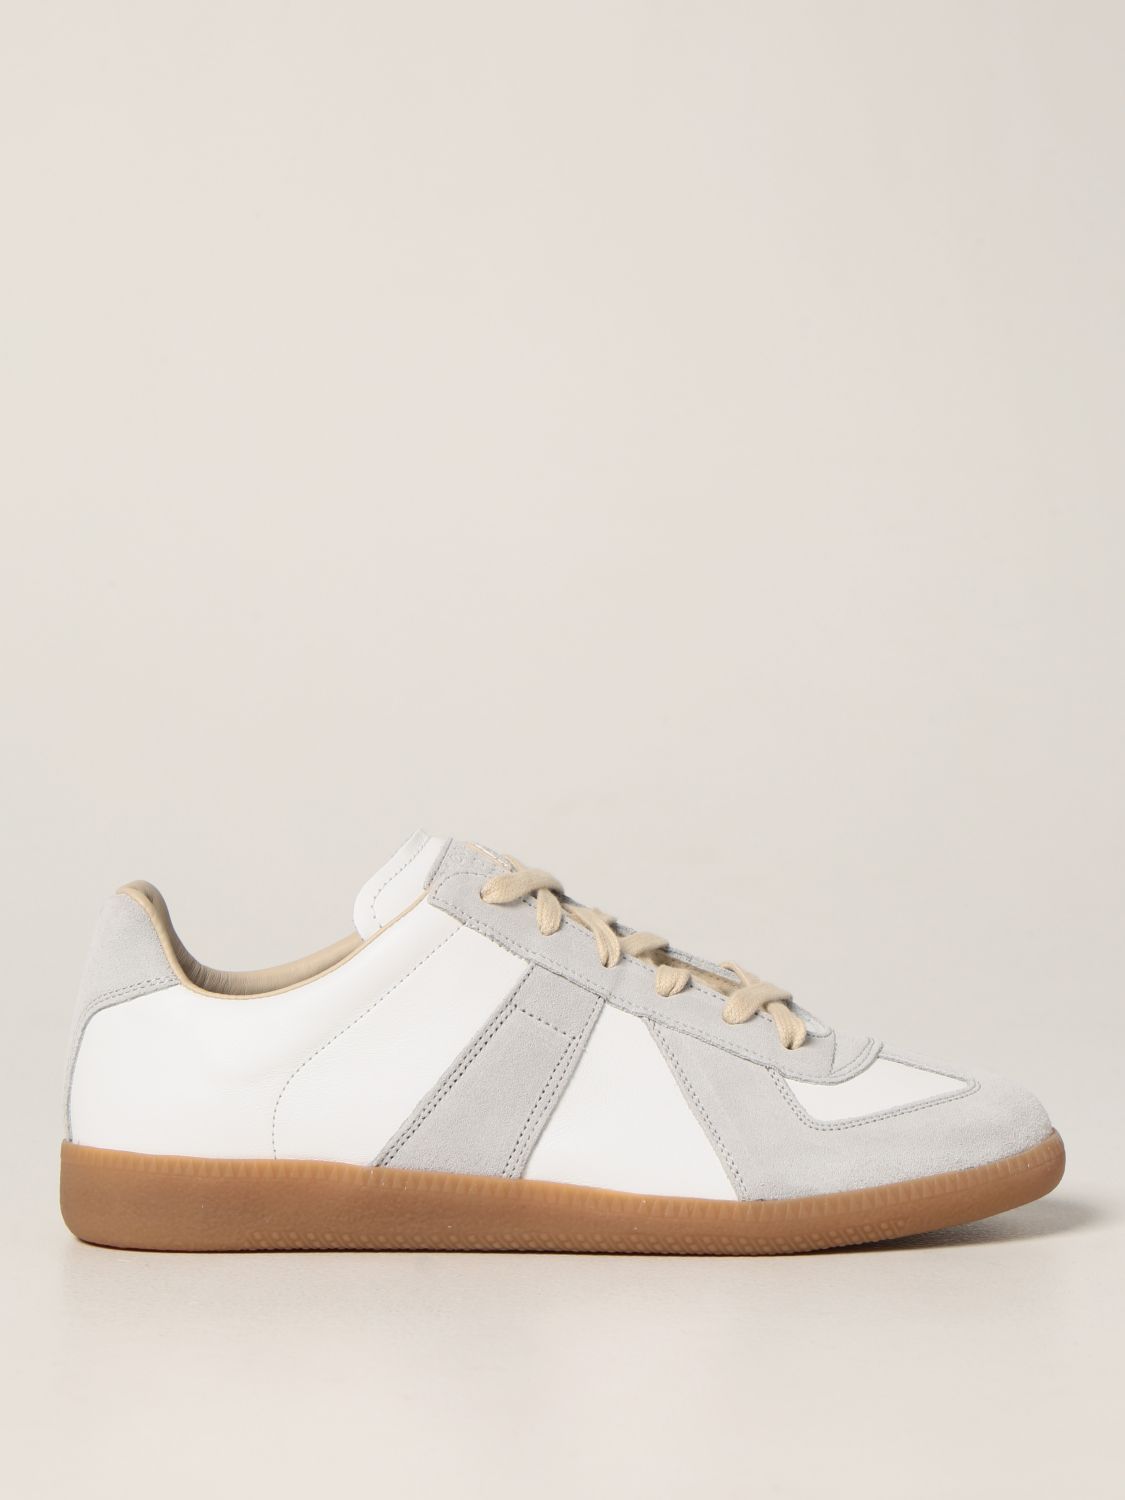 MAISON MARGIELA: Replica suede and leather sneakers - White | Maison ...